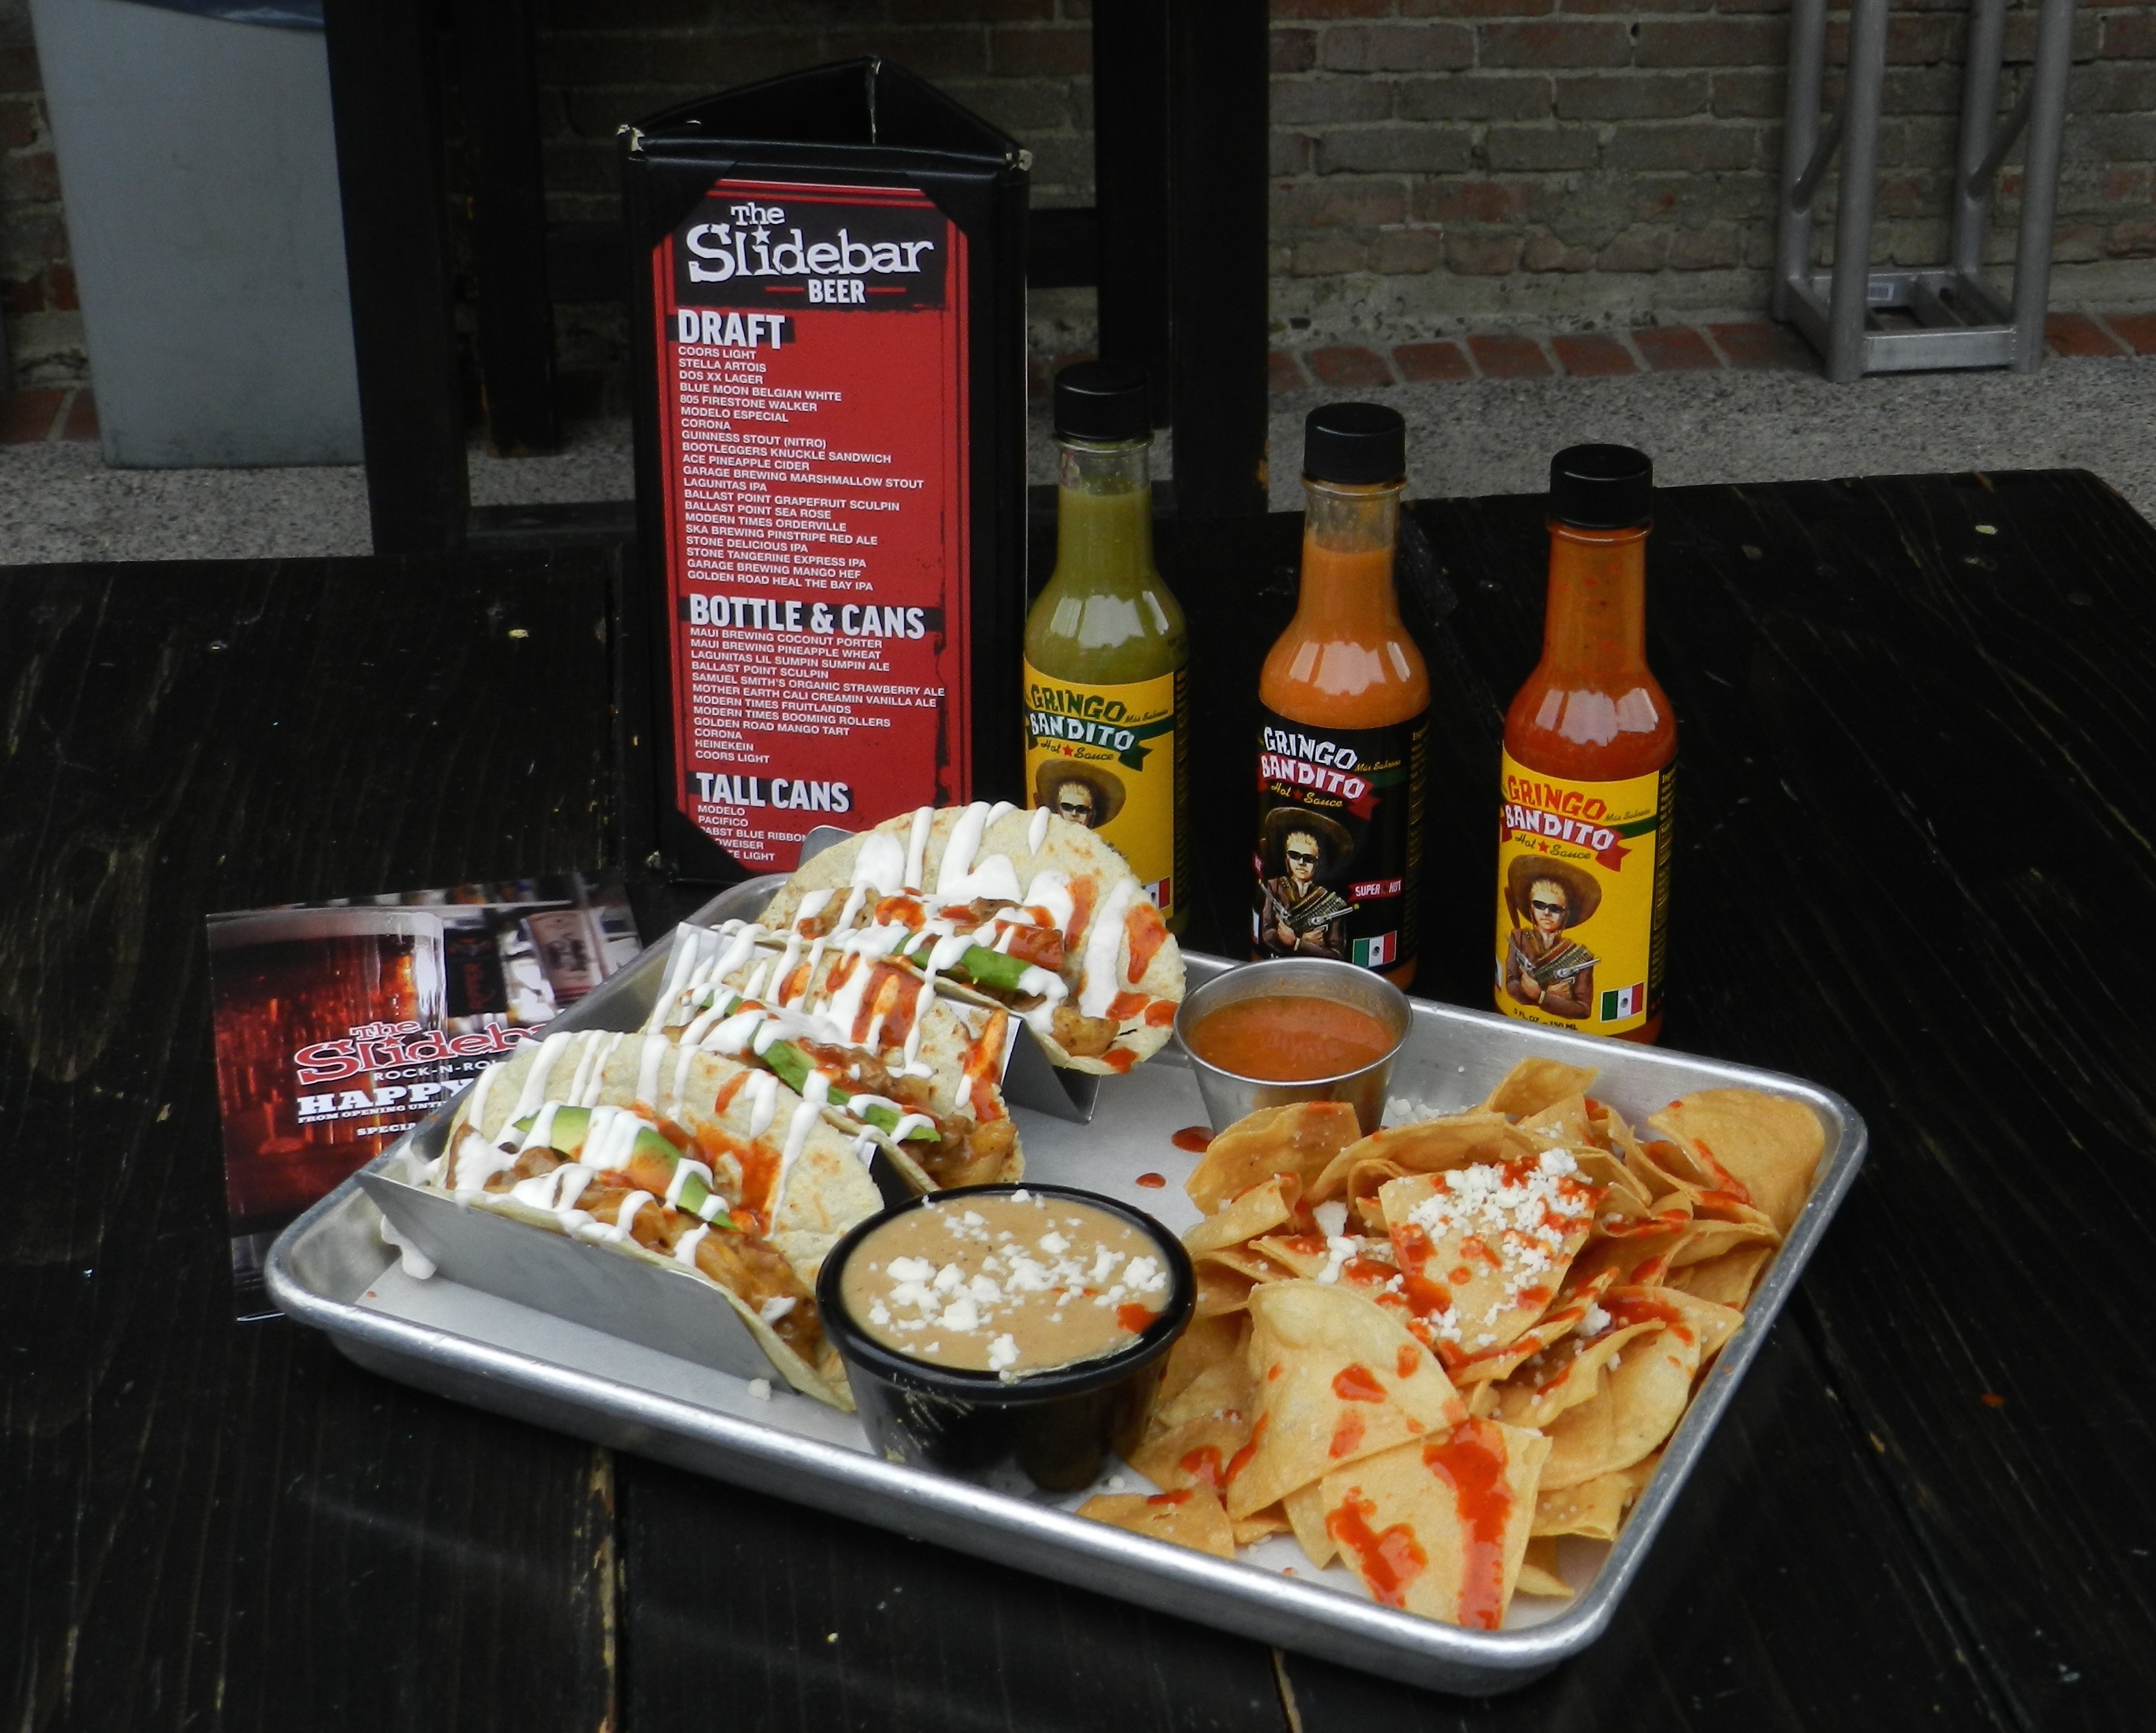 Slidebar in Fullerton, CA: Gringo Bandito Hot Sauce And A Cali Bandito Taco  Make The Night Complete - Girls on Food